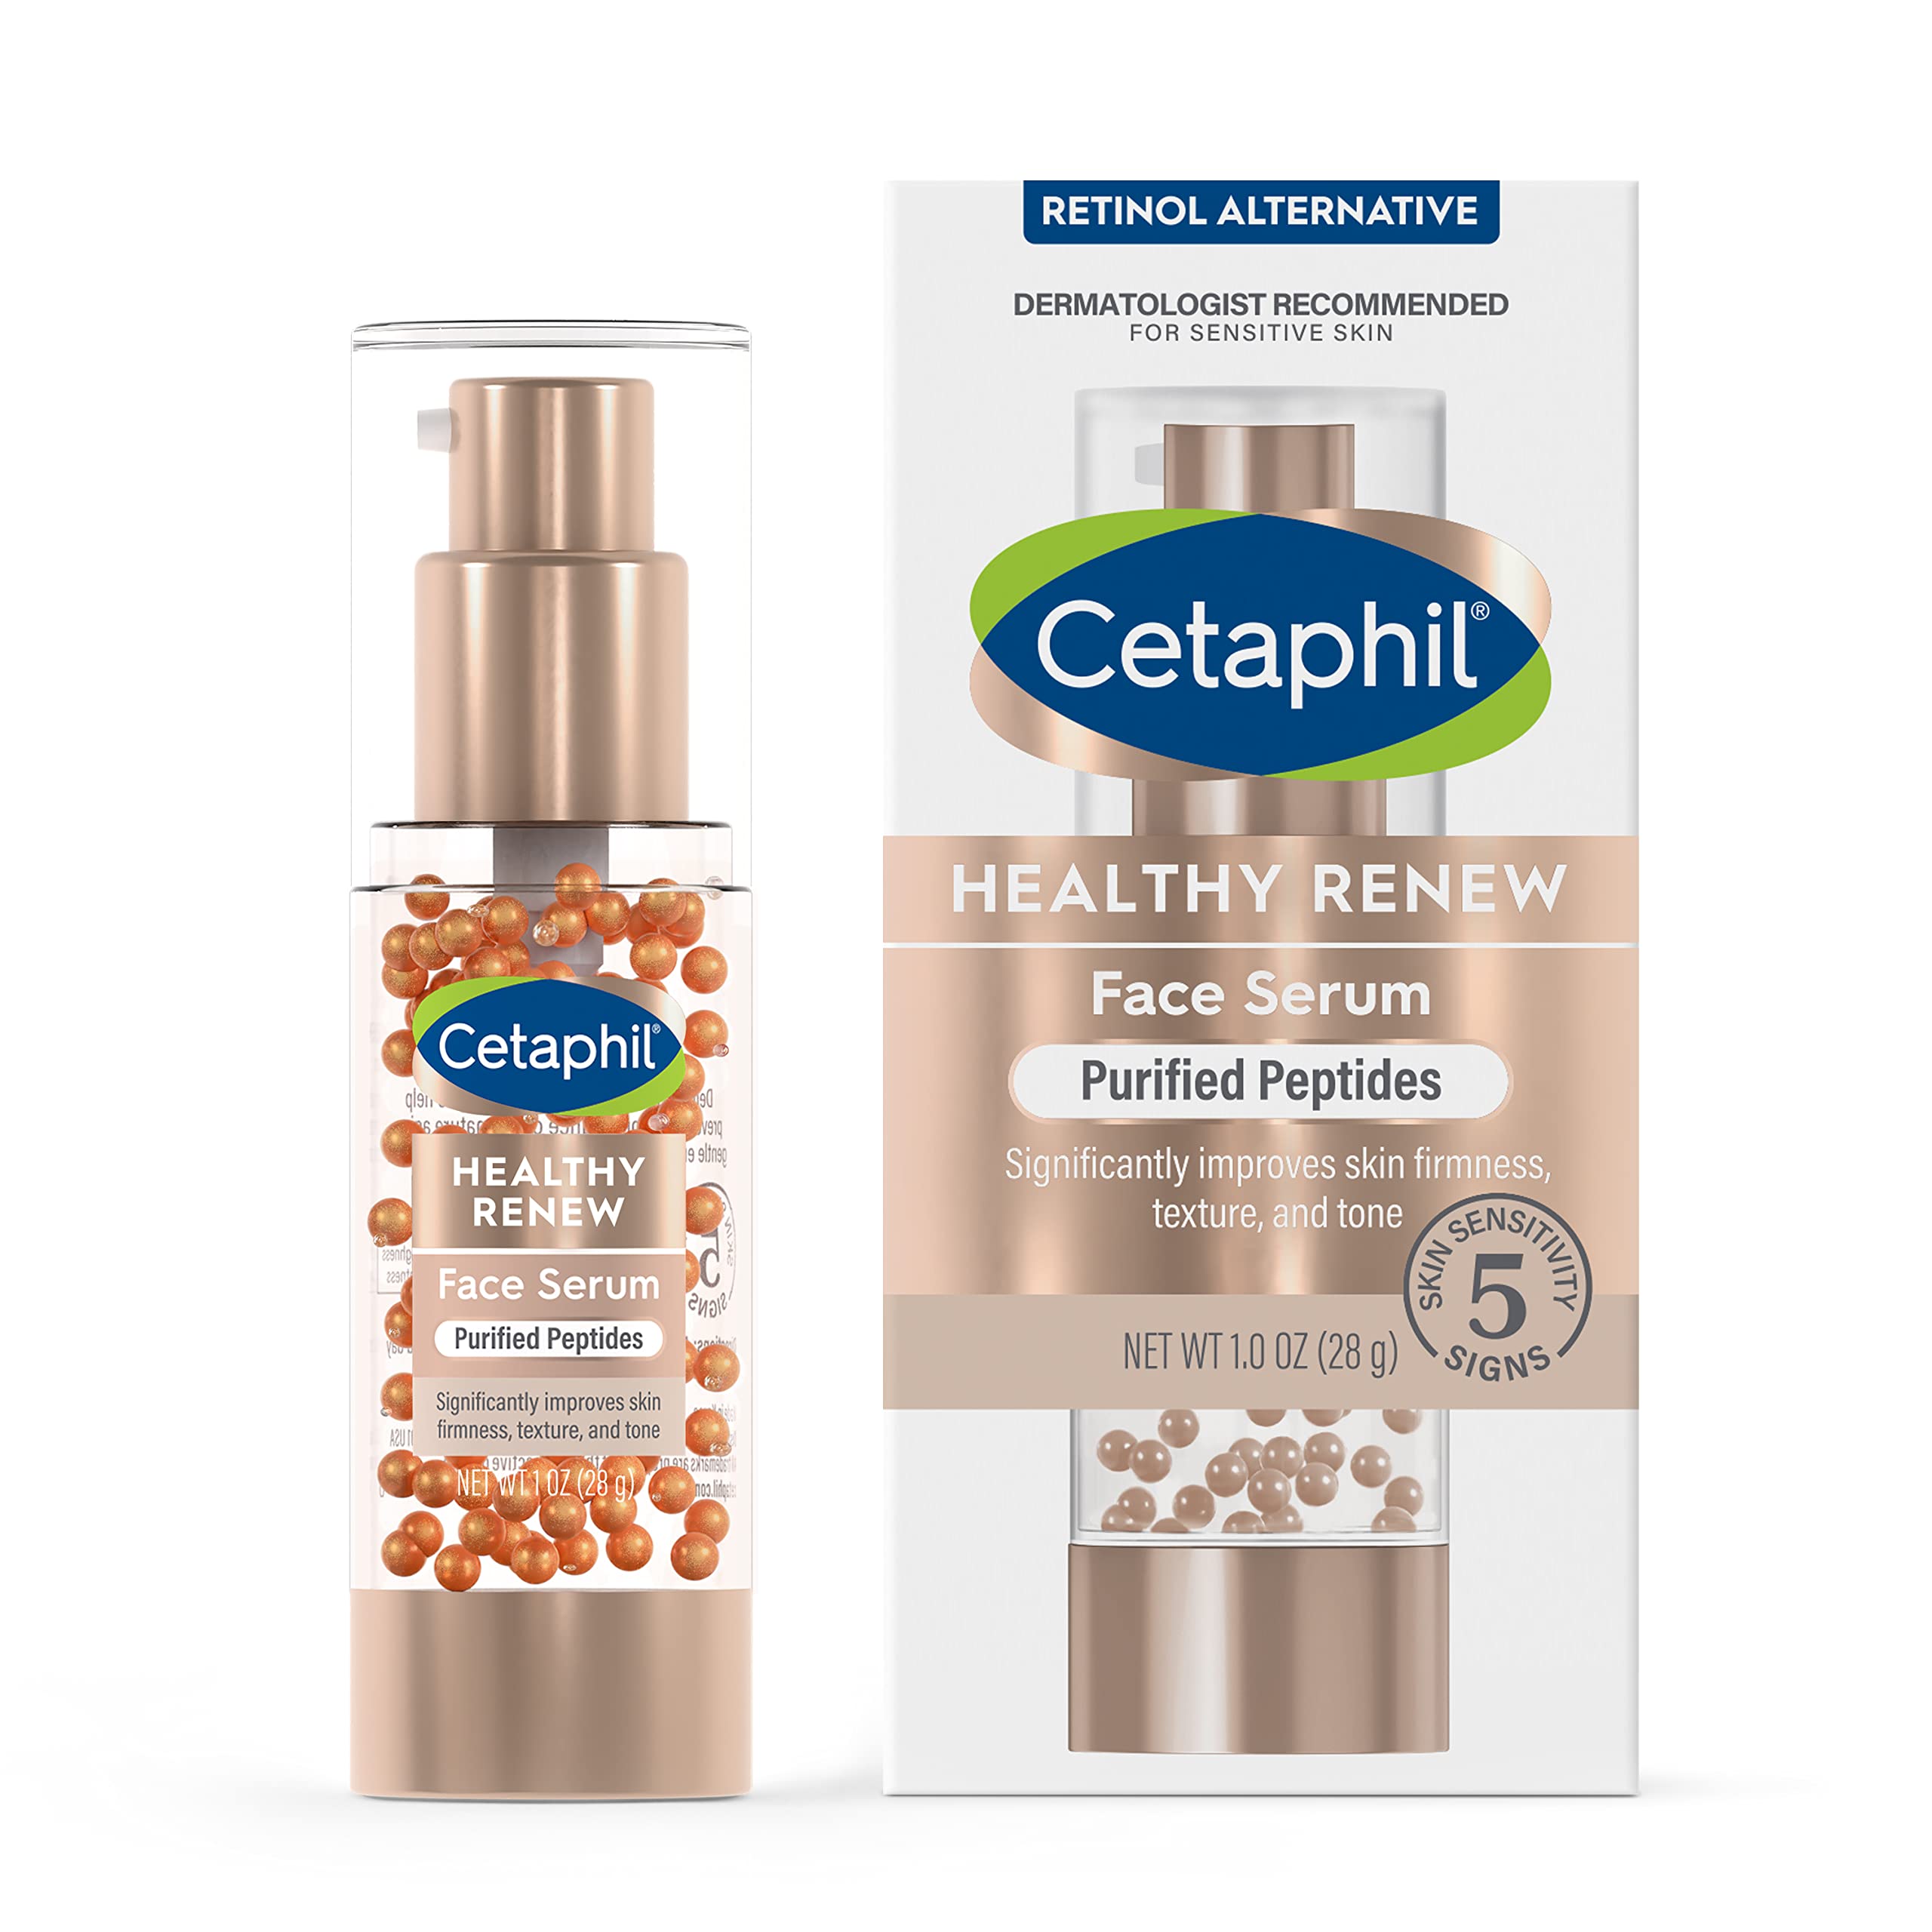 Cetaphil Healthy Renew Anti Aging Face Serum 1 Oz, Retinol Alternative Serum for Face with Niacinamide & Peptides, Skincare for Sensitive Skin with Vitamin B Complex, Fragrance Free